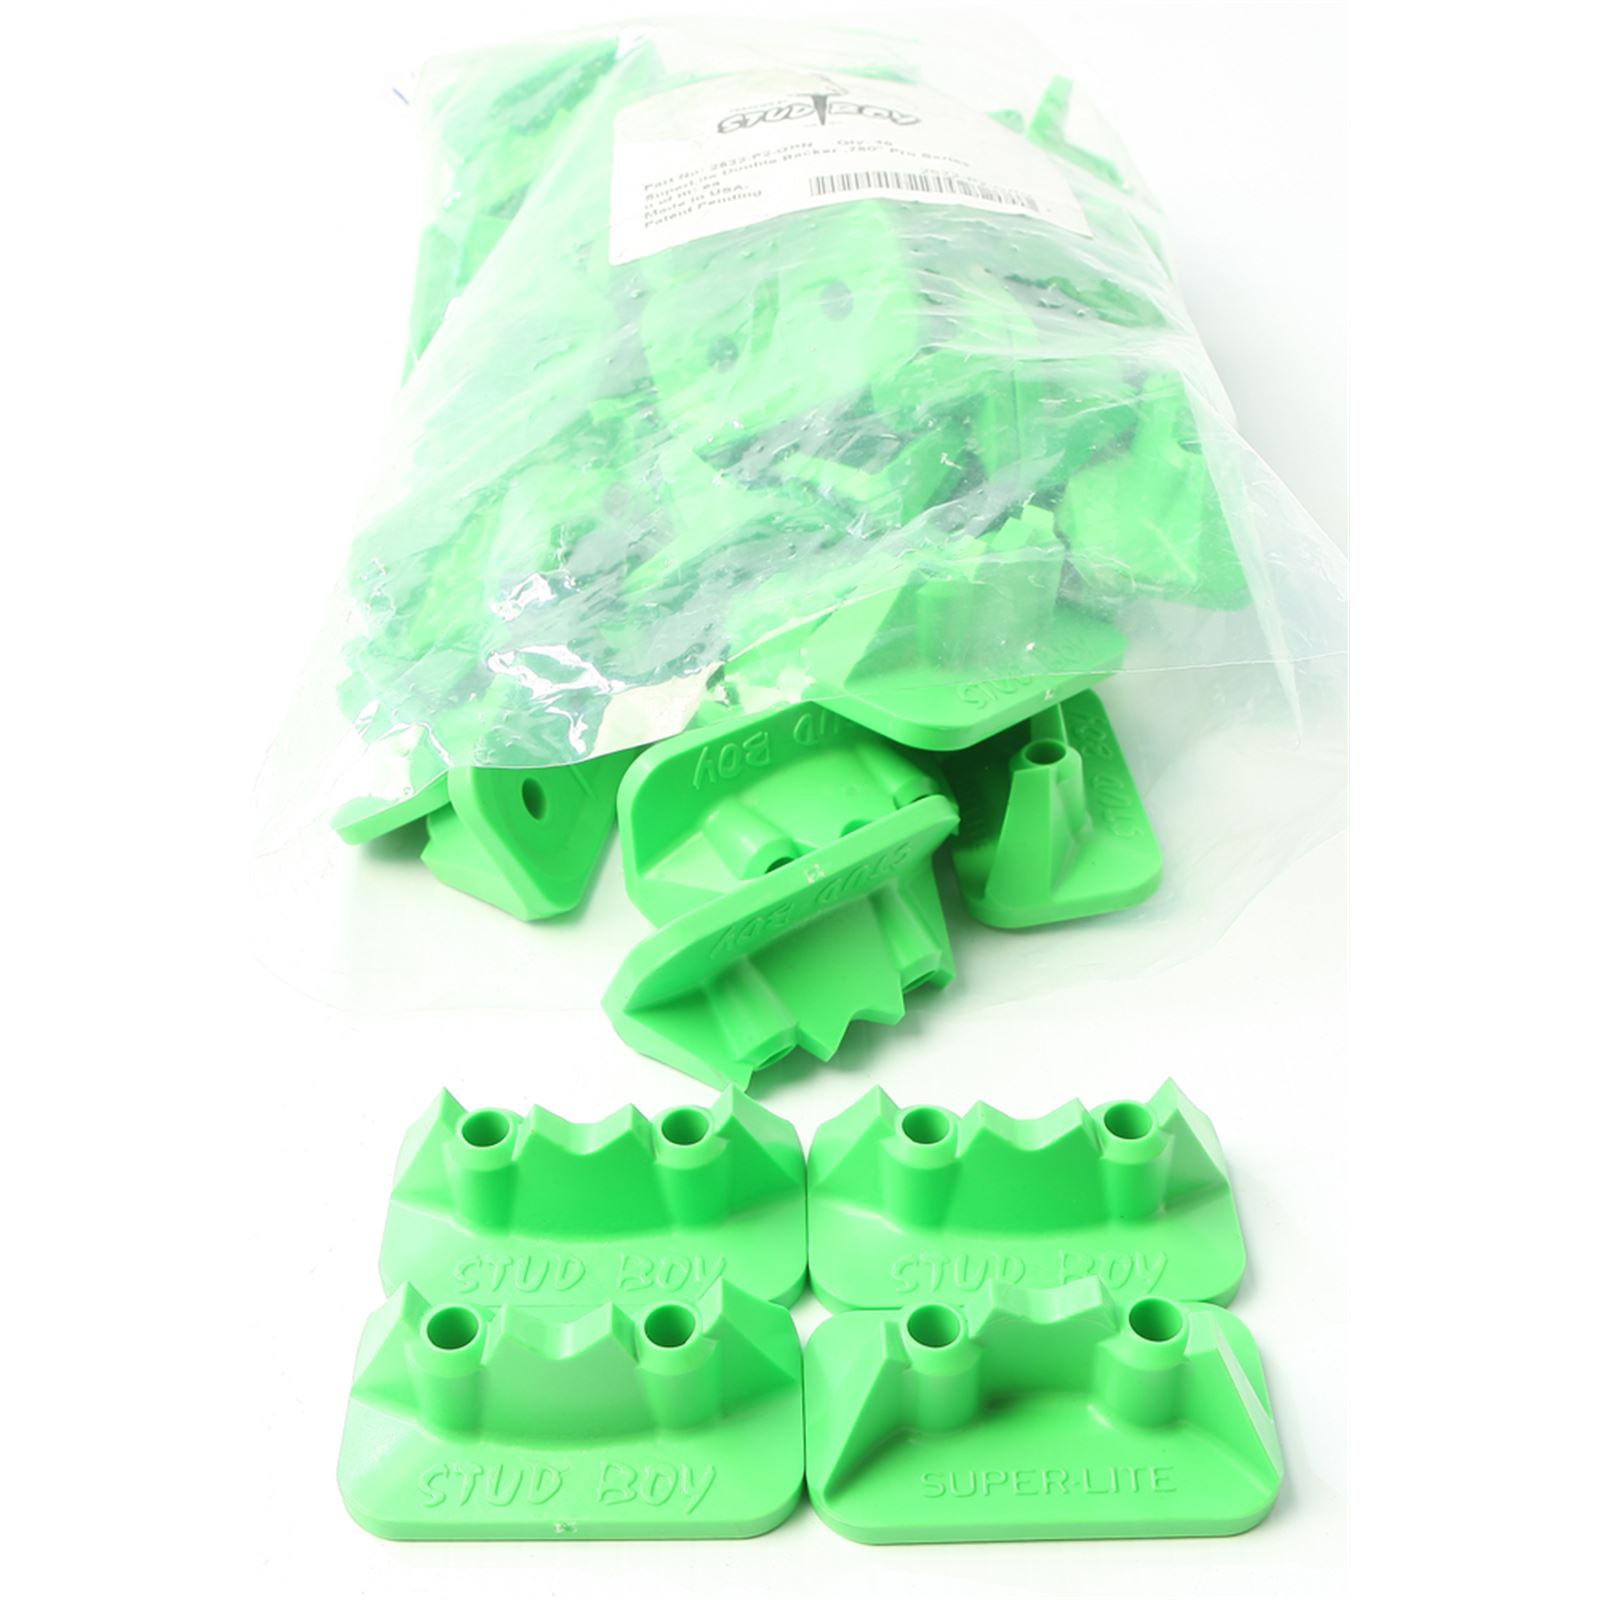 Stud Boy Super-Lite Pro Series Double Backers .75" - 48/Pack Green